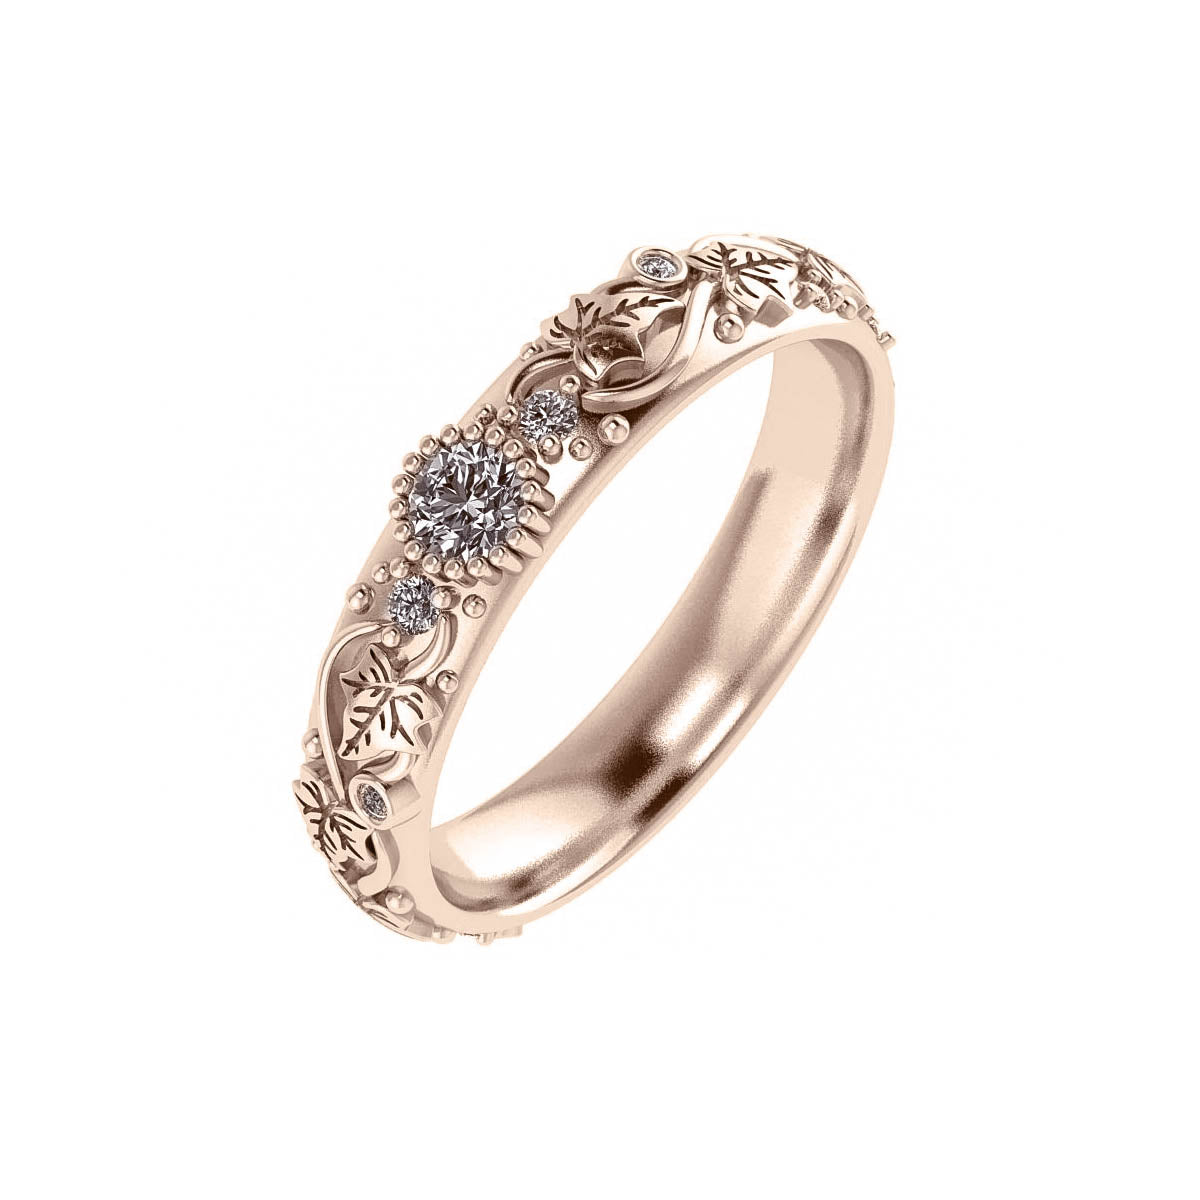 Ivy leaf wedding ring with diamonds, comfort fit ring - Eden Garden Jewelry™